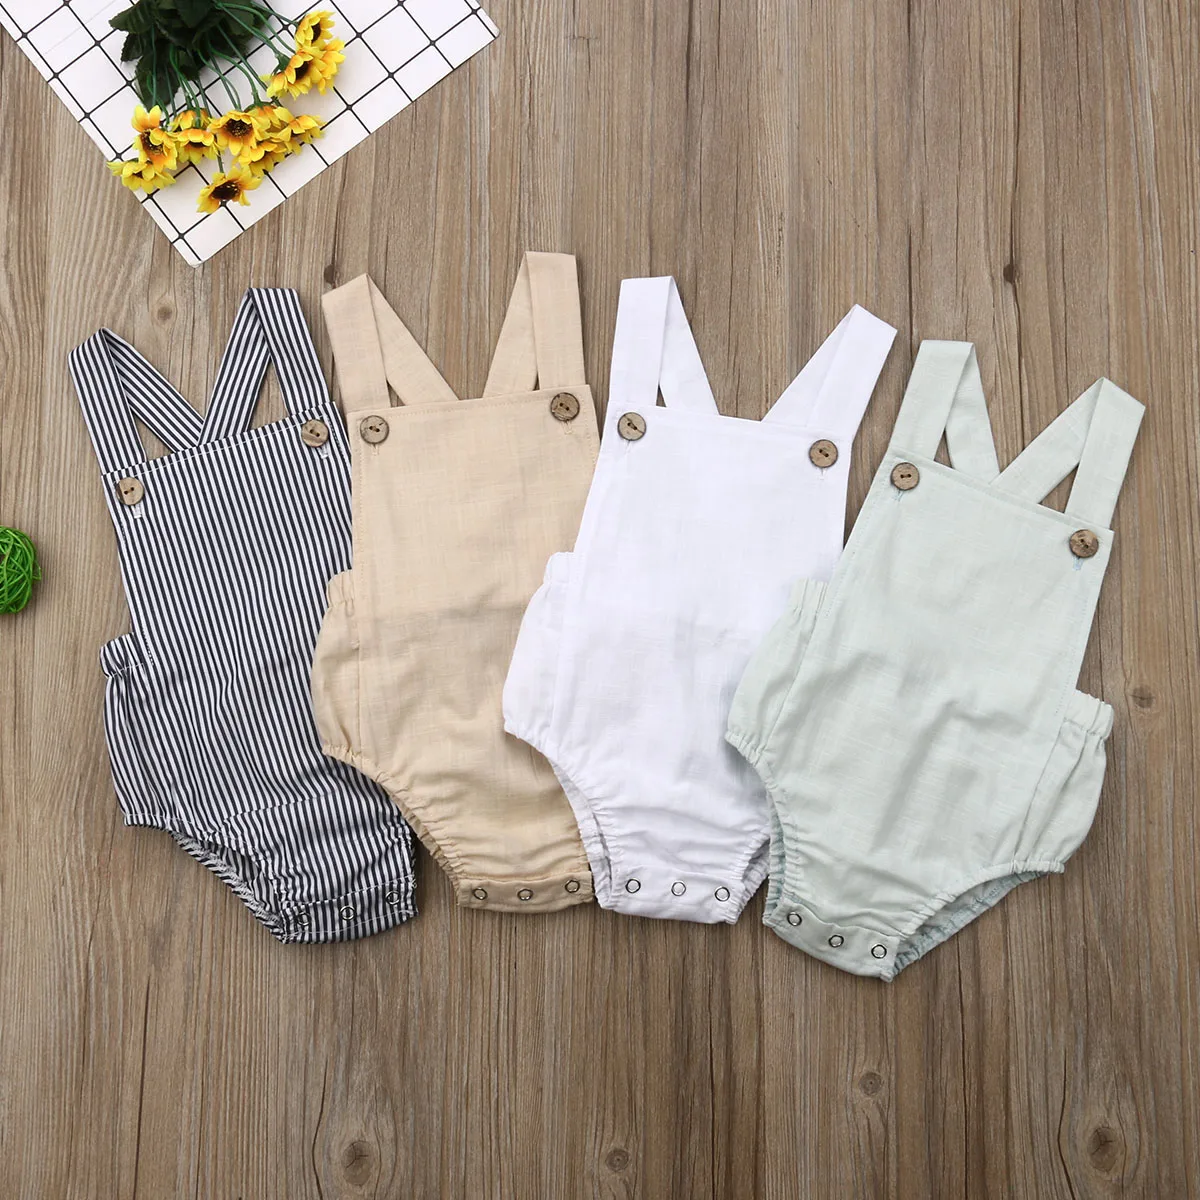 11Color Newborn Infant Baby Boy Girl Bodysuit Summer Button Jumpsuit Striped Casual Sleeveless Backless Solid Outfits Clothes cool baby bodysuits	